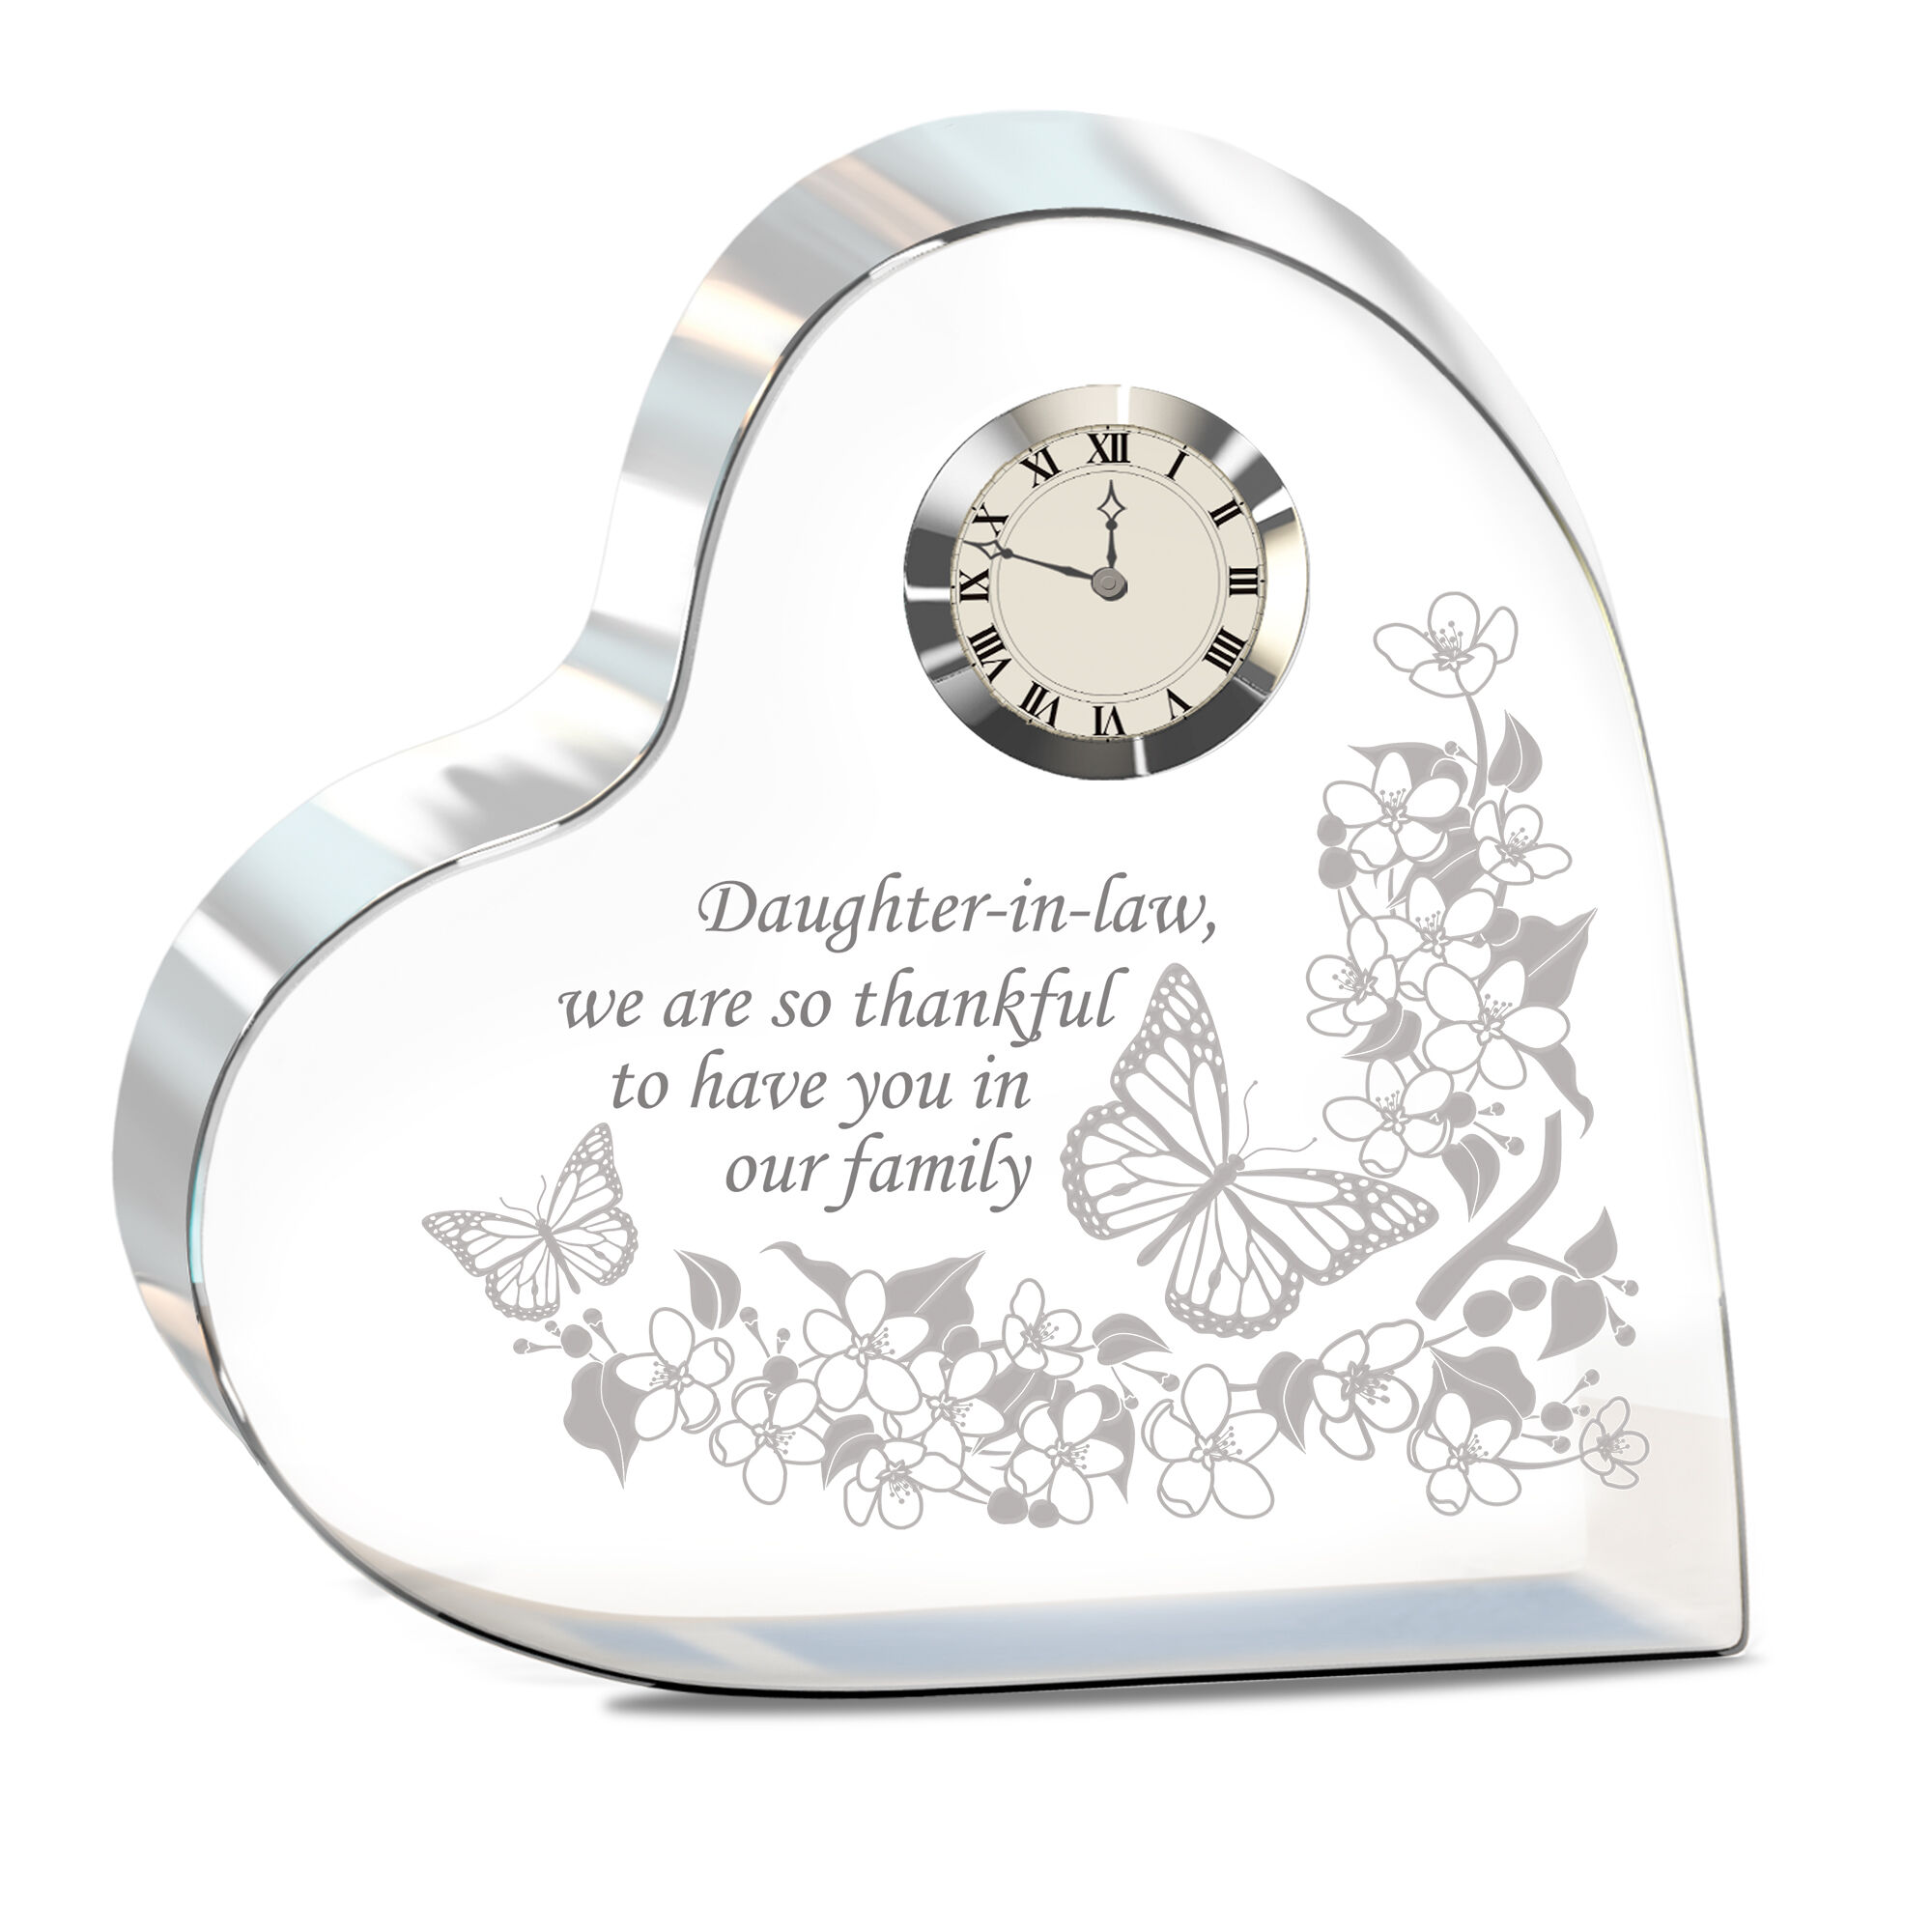 My Daughter in Law We Are So Thankful Crystal Desk Clock 10222 0019 a main